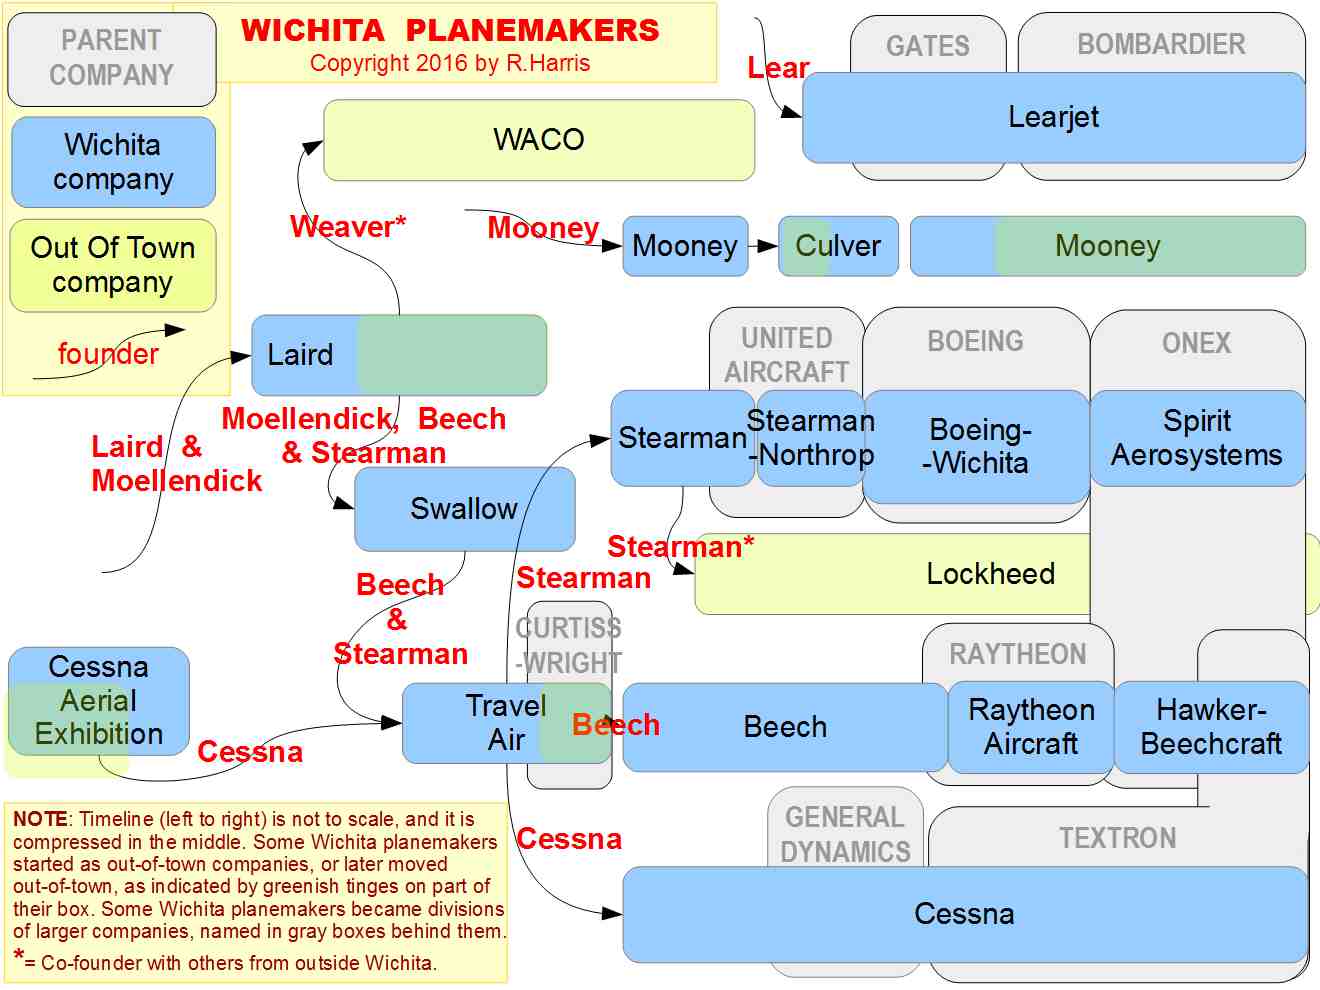 Wichita Planemakers, past & present - Geneaology Chart - CLICK ON IMAGE TO ENLARGE